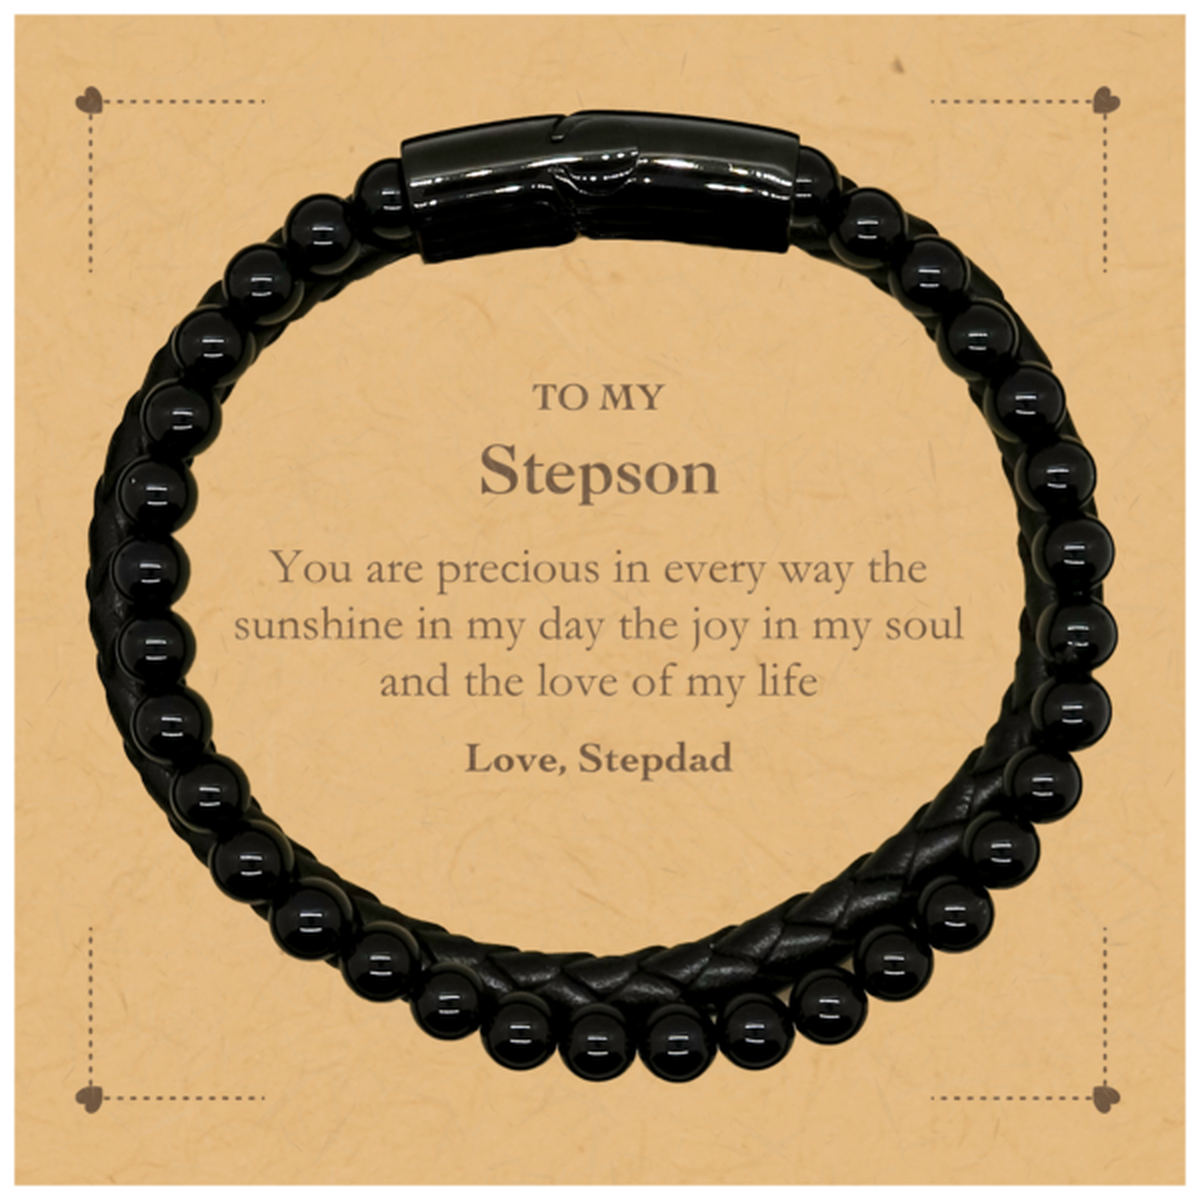 Graduation Gifts for Stepson Stone Leather Bracelets Present from Stepdad, Christmas Stepson Birthday Gifts Stepson You are precious in every way the sunshine in my day. Love, Stepdad